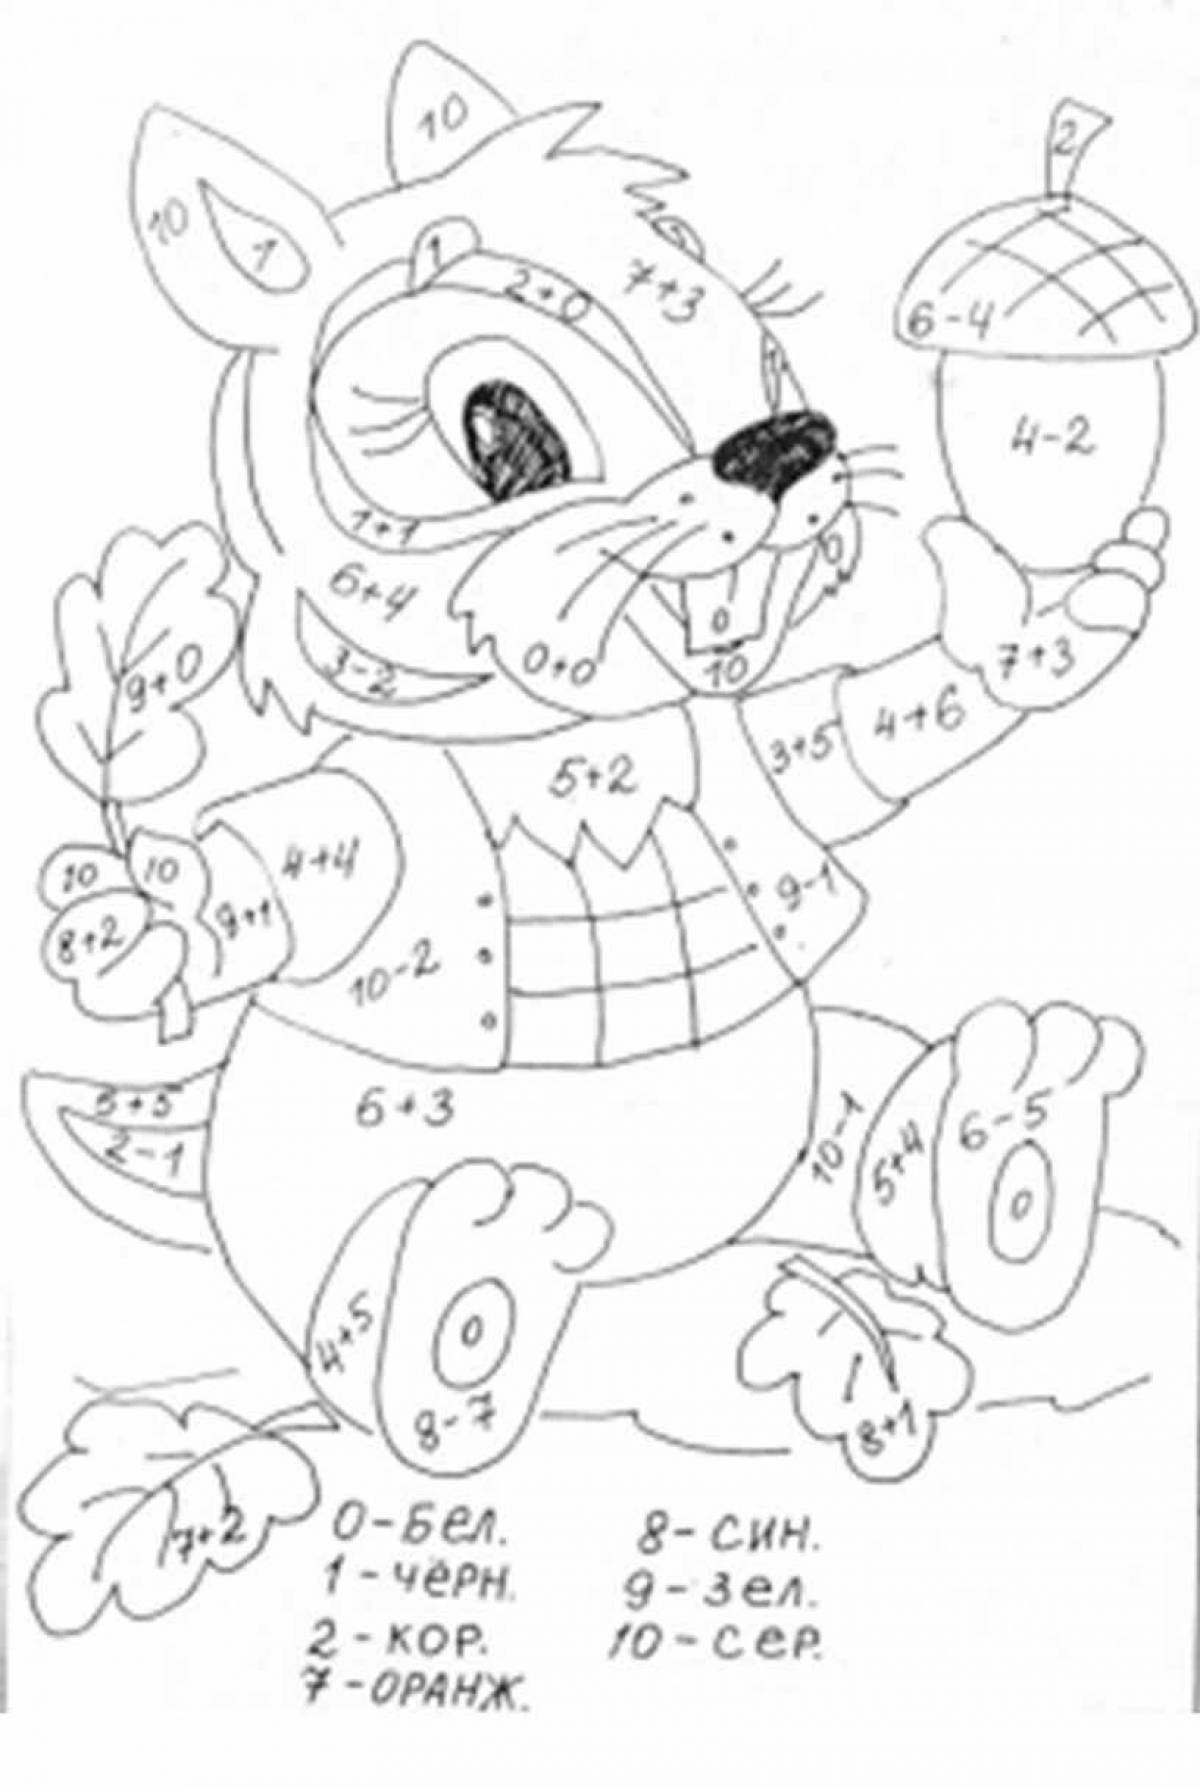 Awesome 1st grade addition and subtraction coloring page